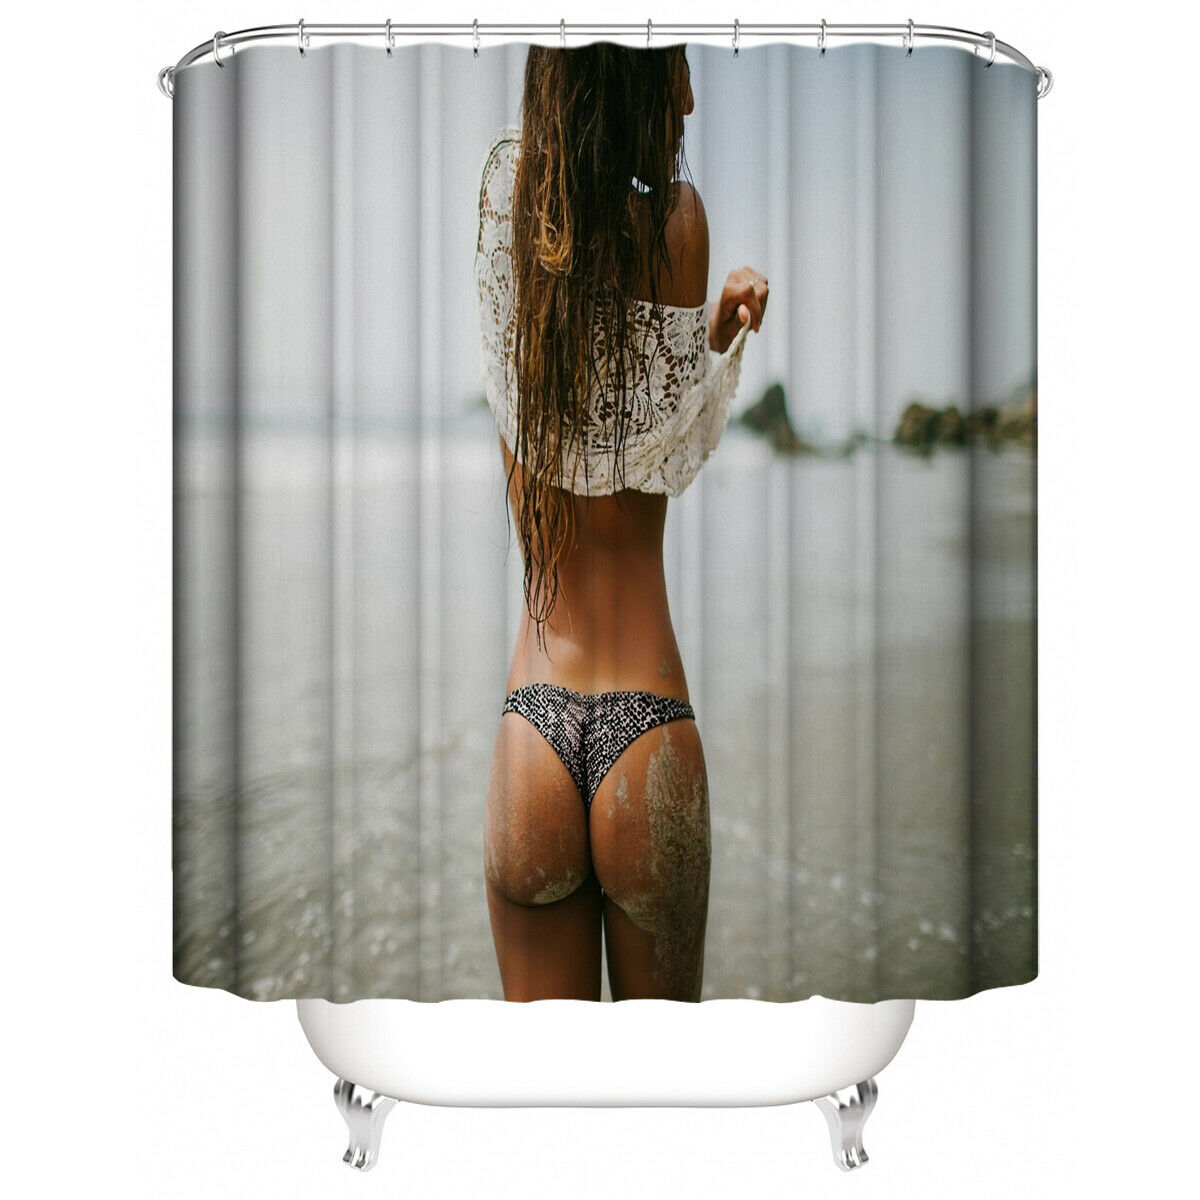 Sexy Woman Shower Curtain Bathroom Rug Set Bath Mat Non-Slip Toilet Lid Cover-180×180cm Shower Curtain Only-Free Shipping at meselling99